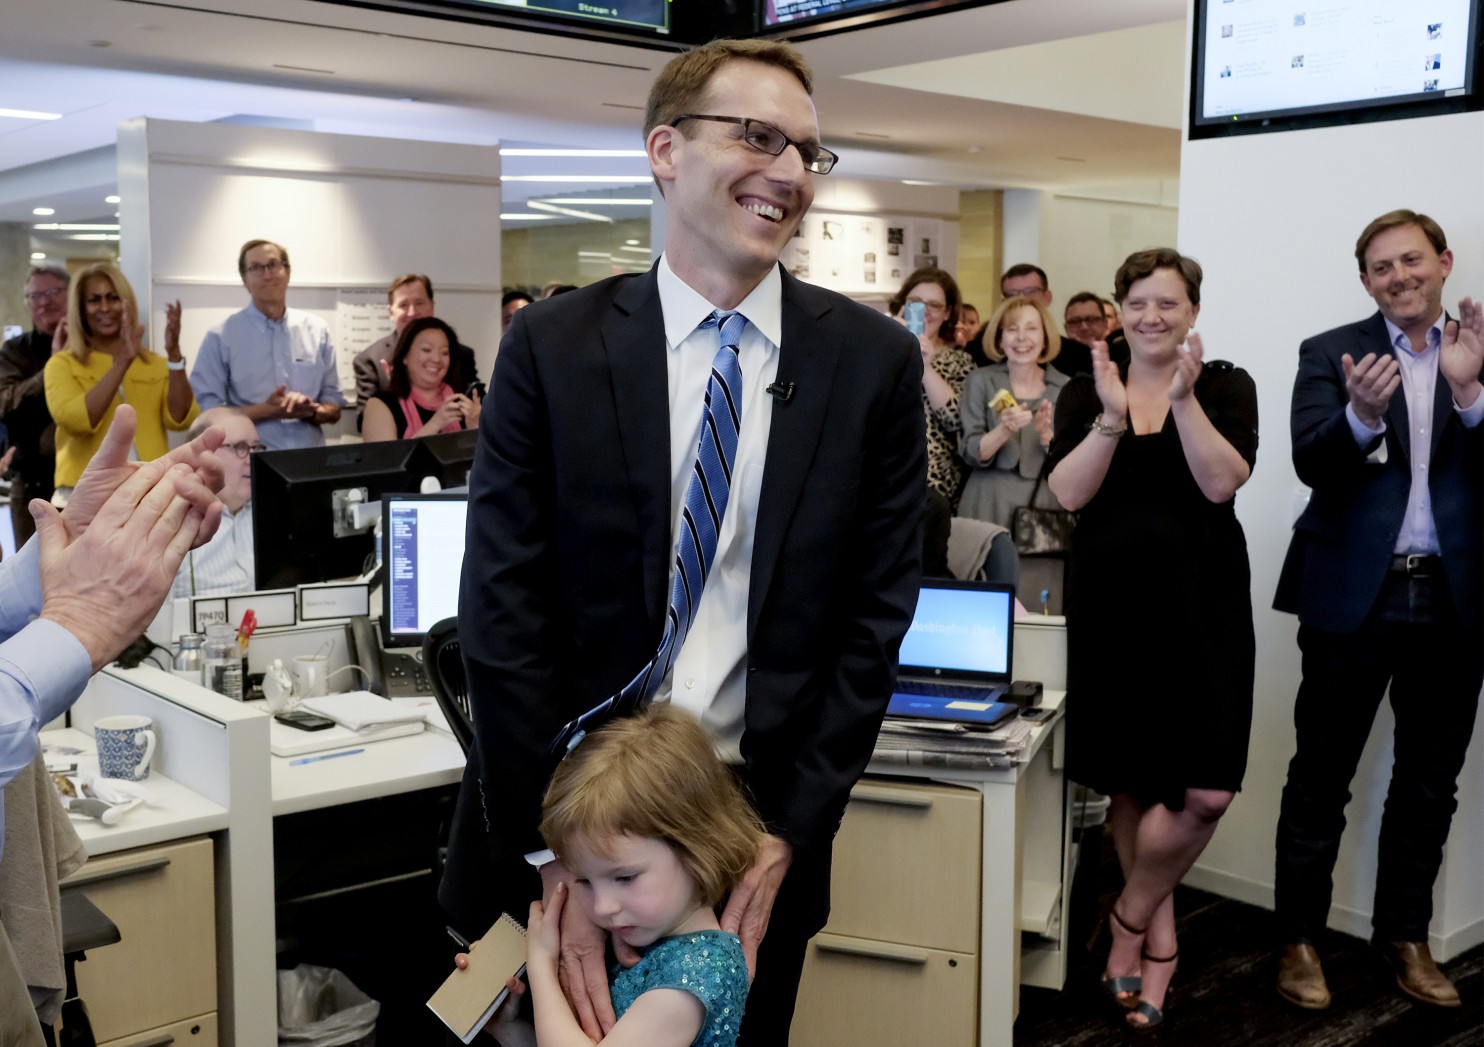 David Fahrenthold reacts to the announcement that he won the Pulitzer Prize for National Reporting at The Washington Post. (Photo Courtesy: Bonnie Jo Mount/Washington Post)